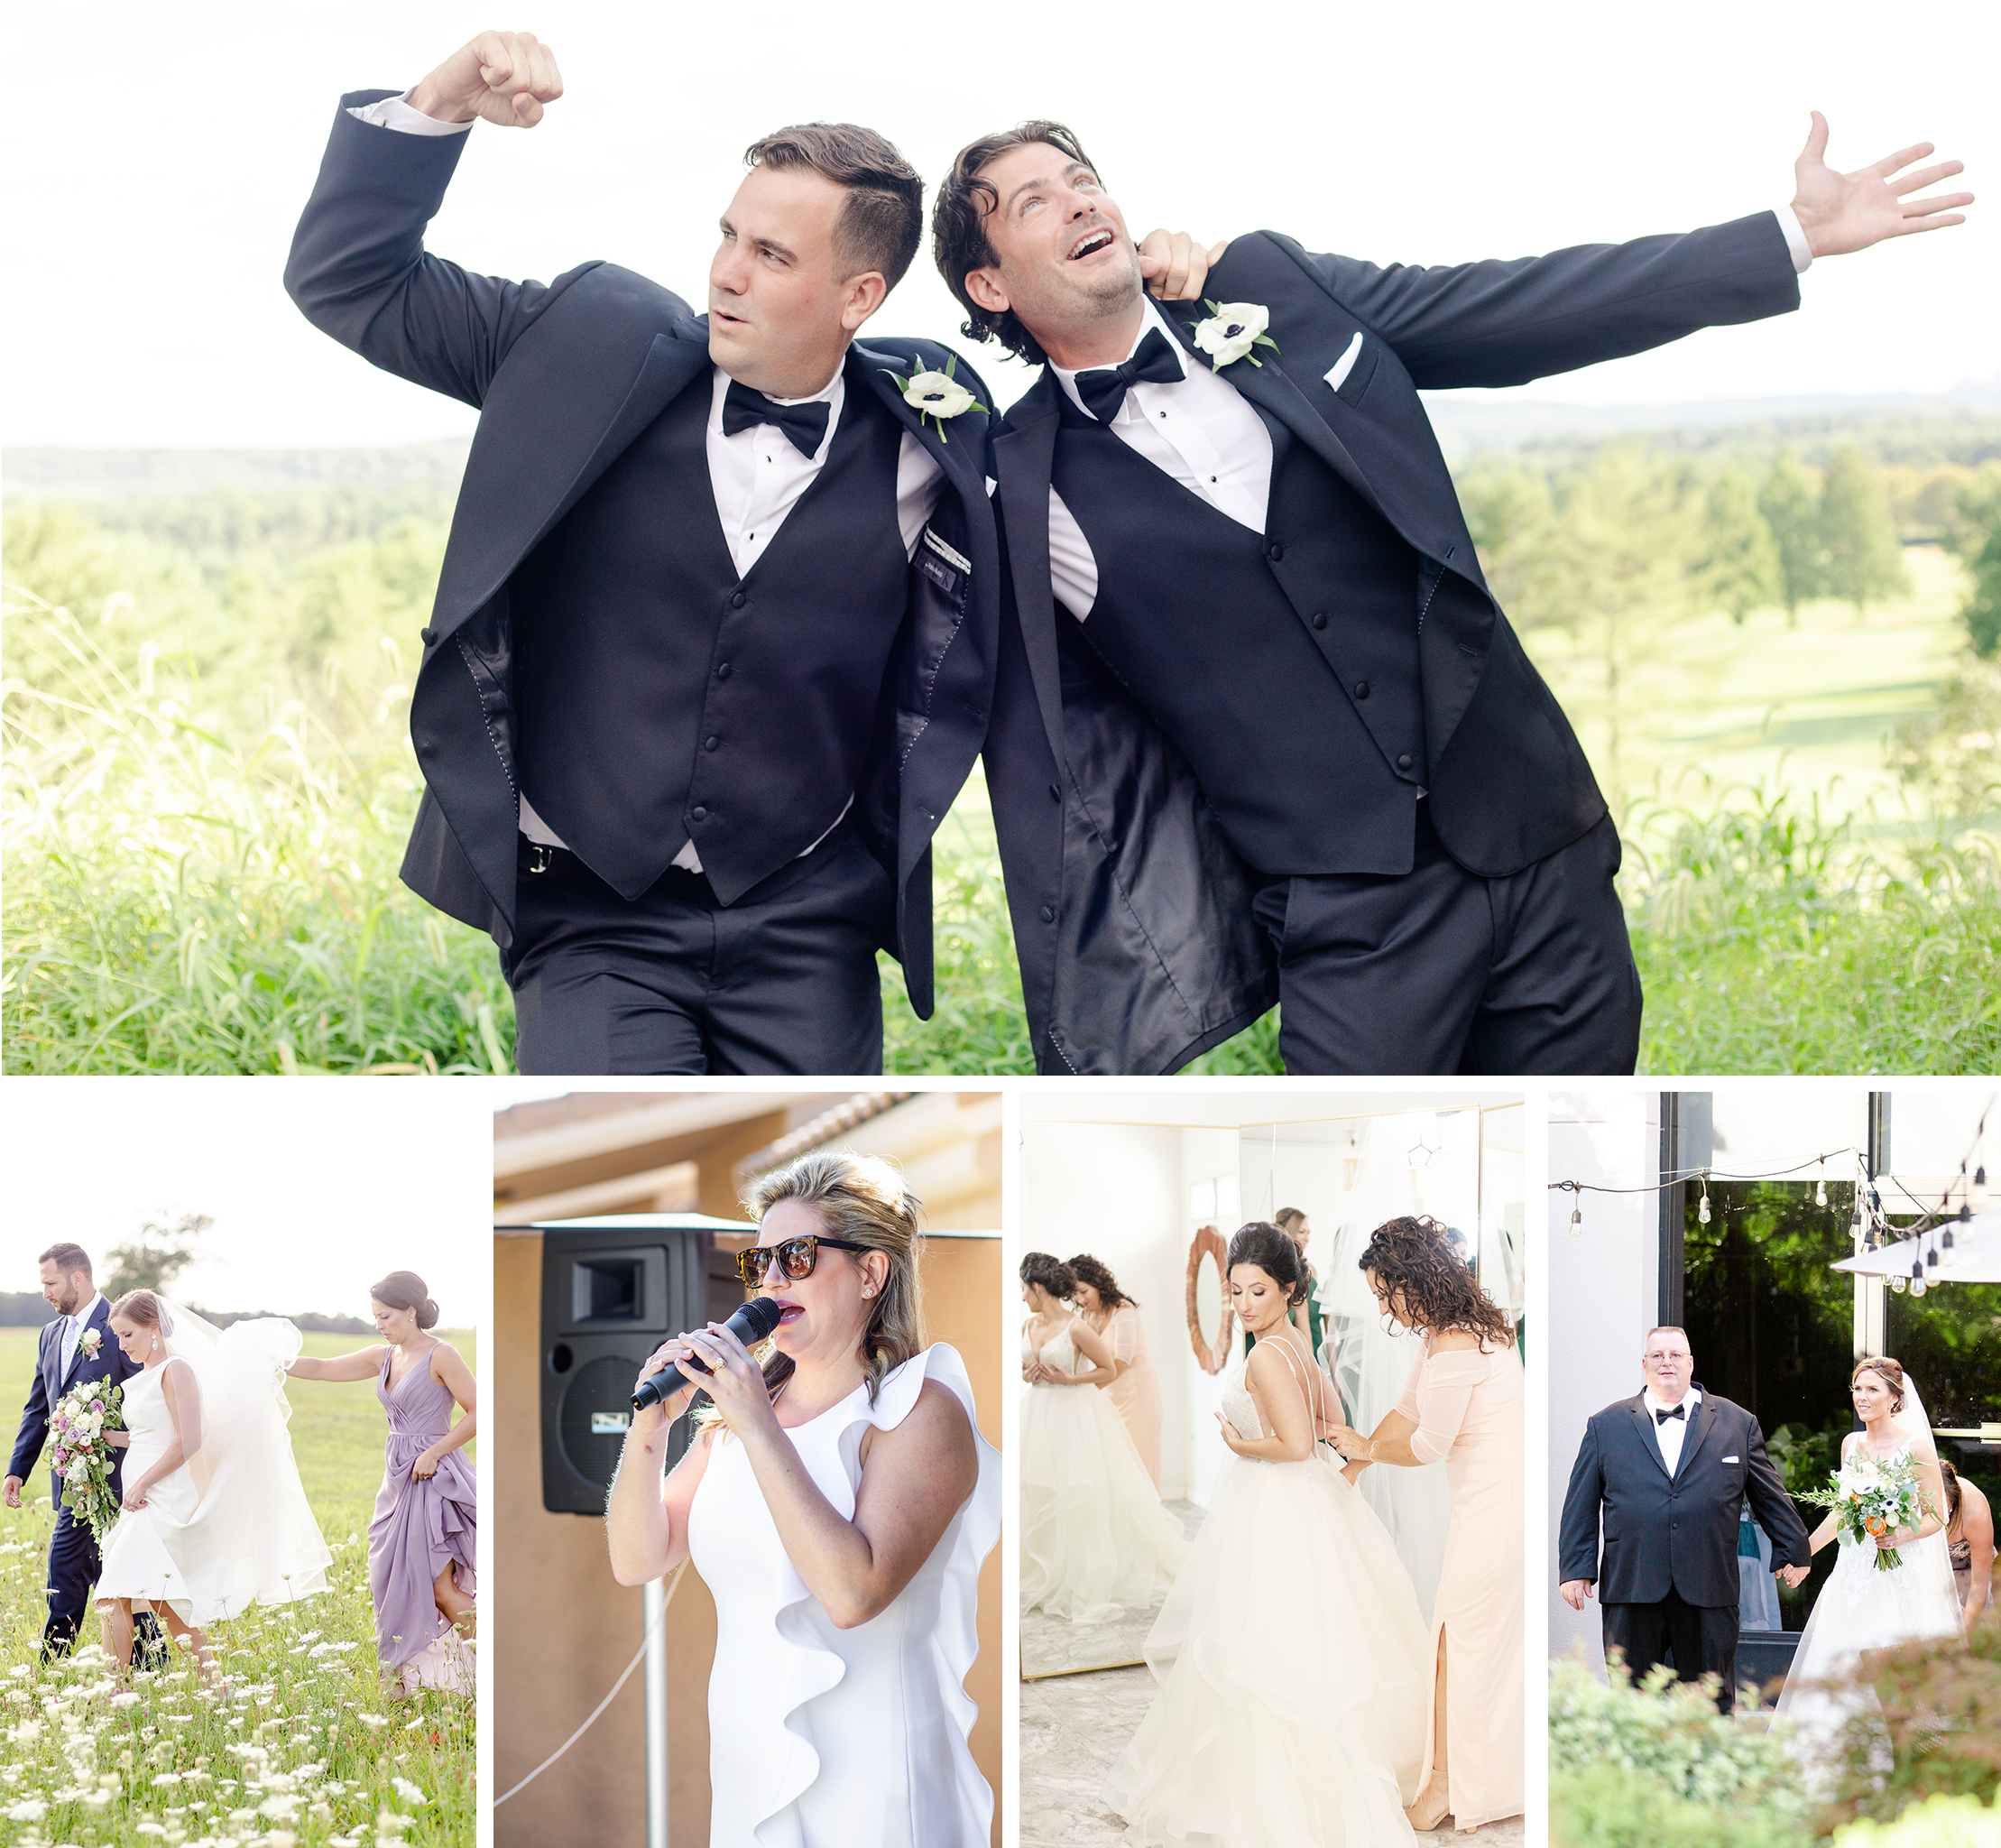 Collage of Wedding Photos that Showcase Different Supportive Roles